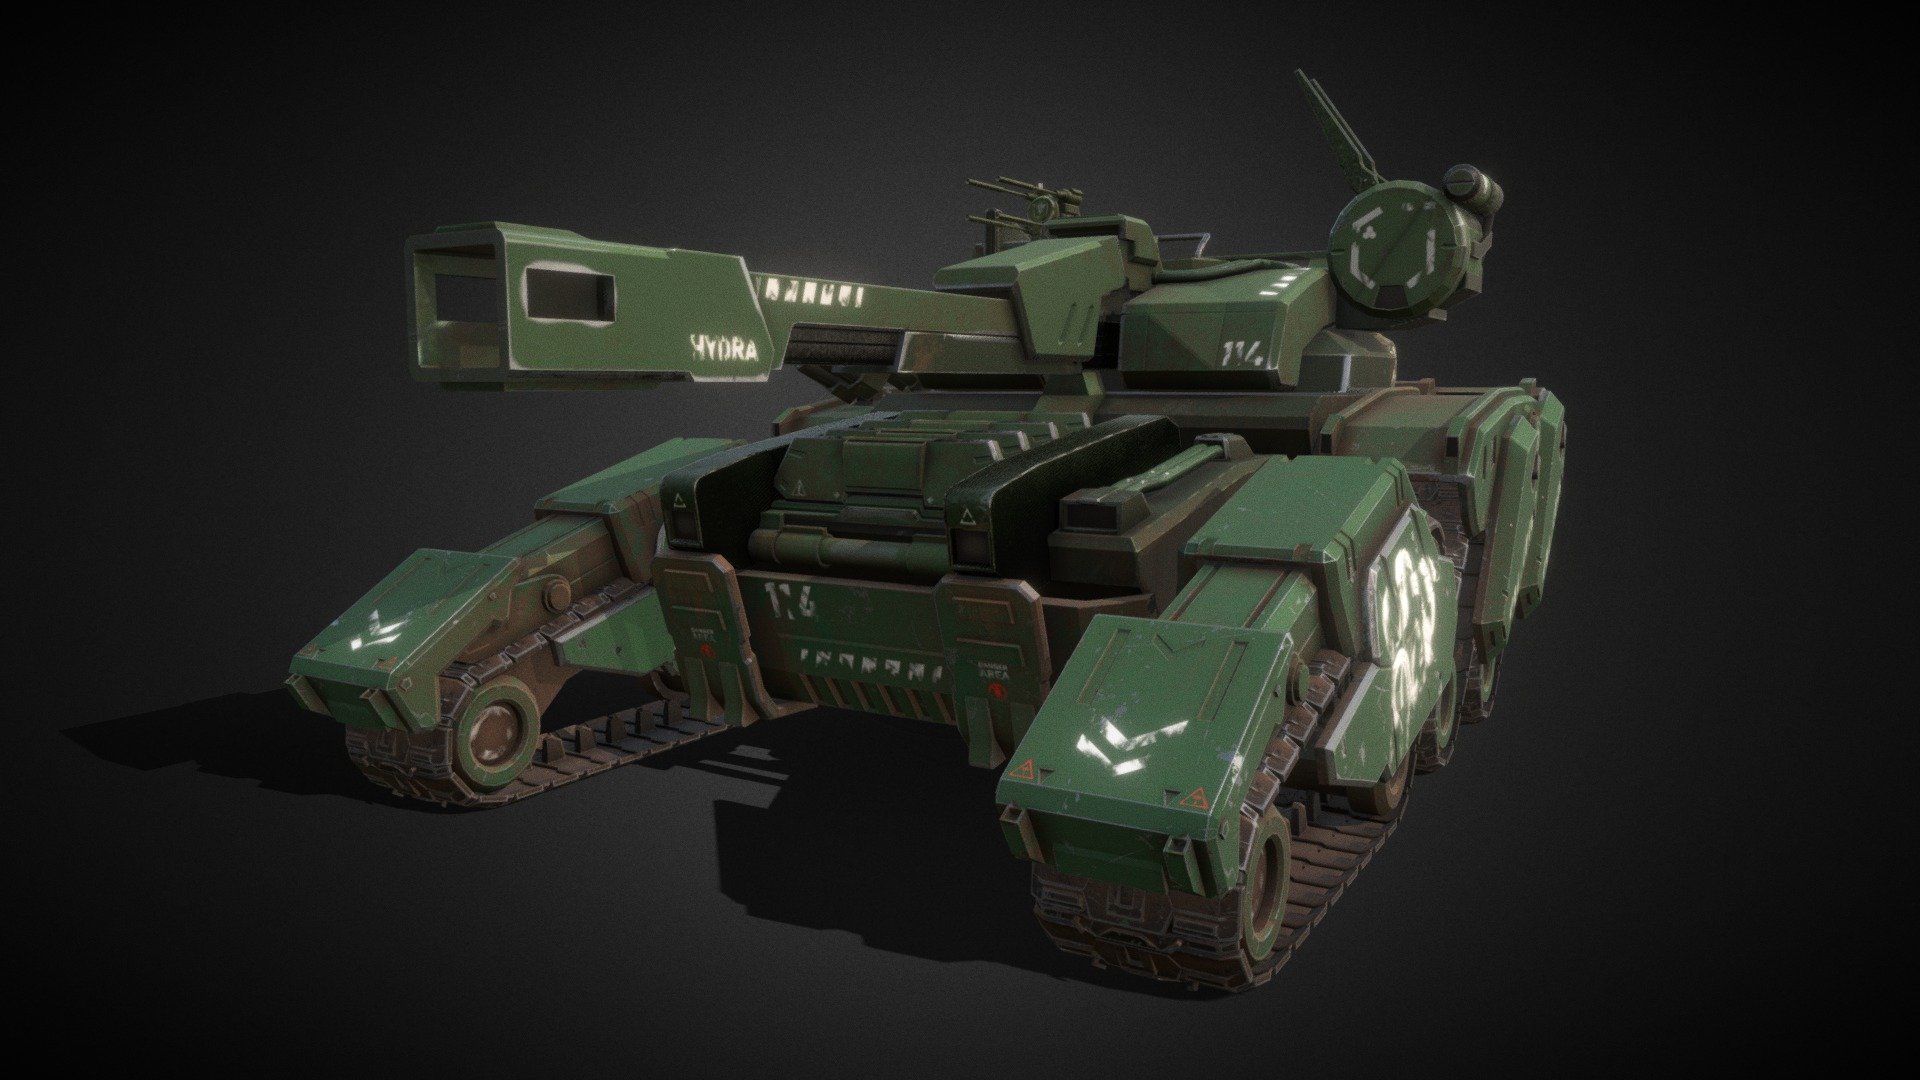 Sci-fi medium tank T48 HYDRA.
If you liked it or not, or you can give me advice - let me know! 

ENJOY! - Sci-fi Tank - 3D model by Wild-Xipster (@wild_xipster) 3d model